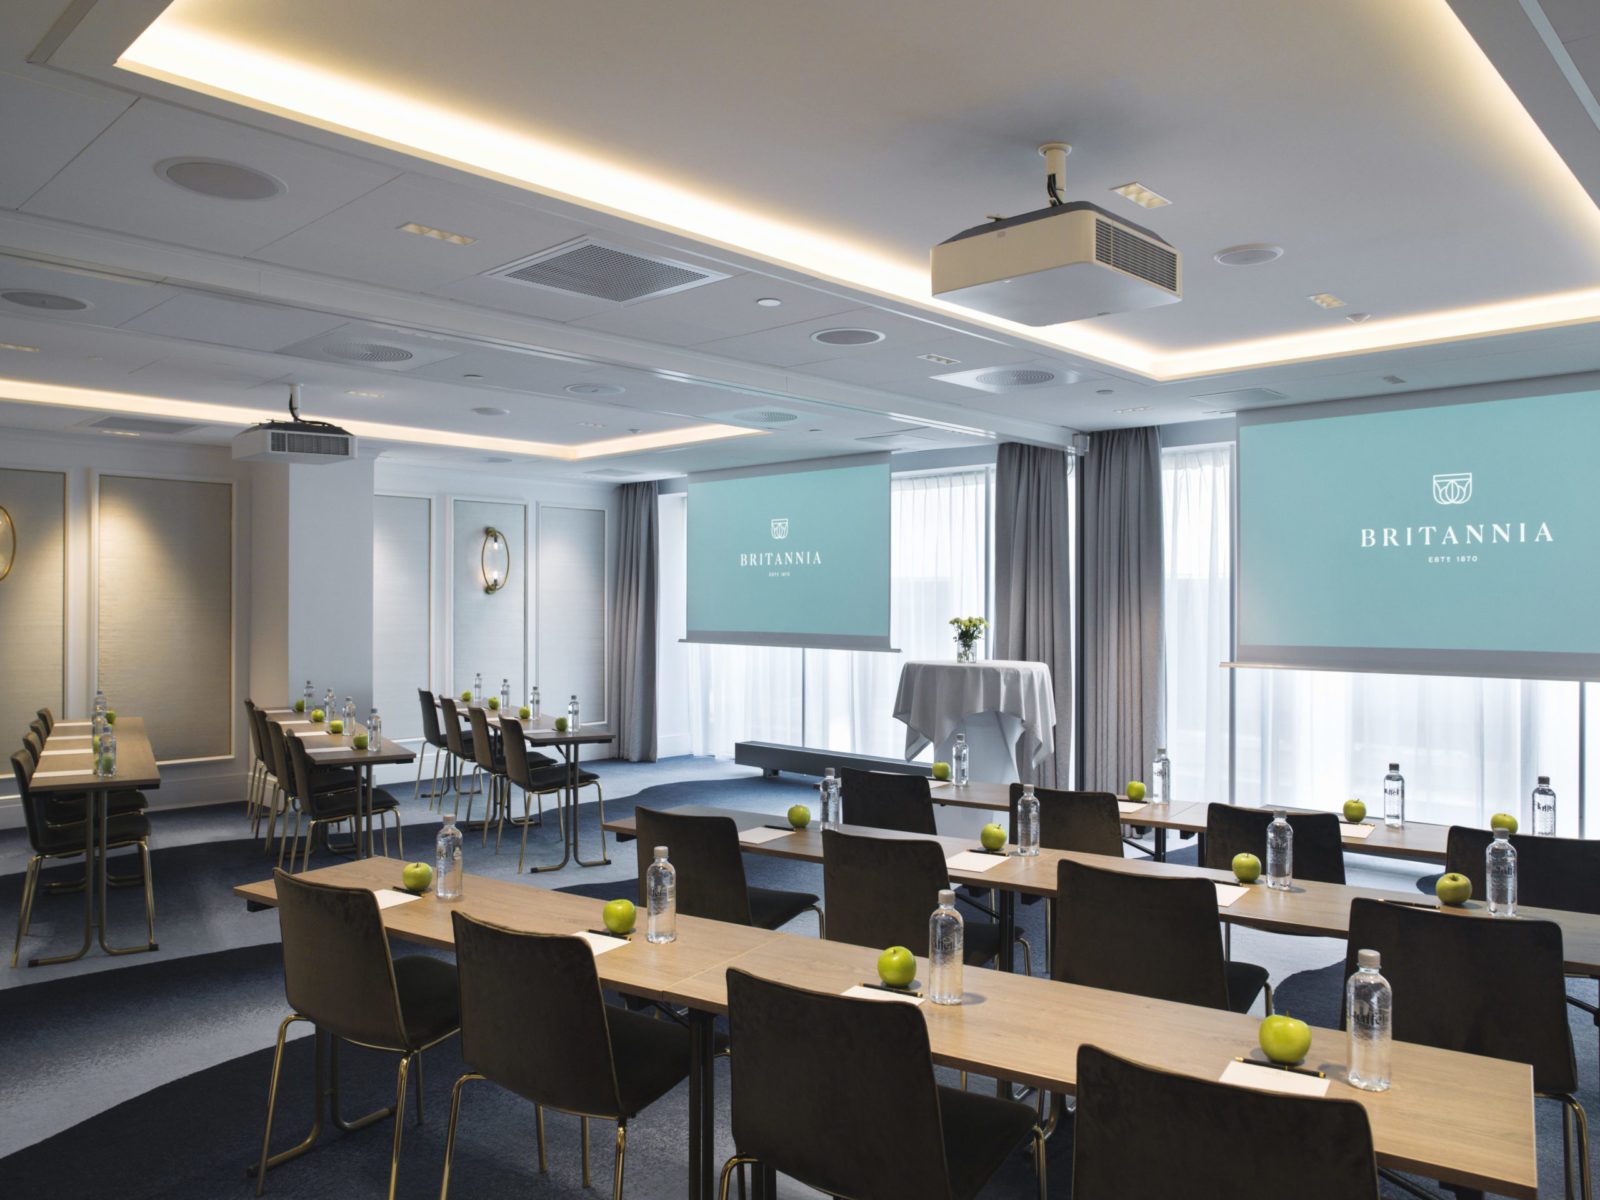 Conference room at Britannia Hotel with 2 big screens and classroom seating